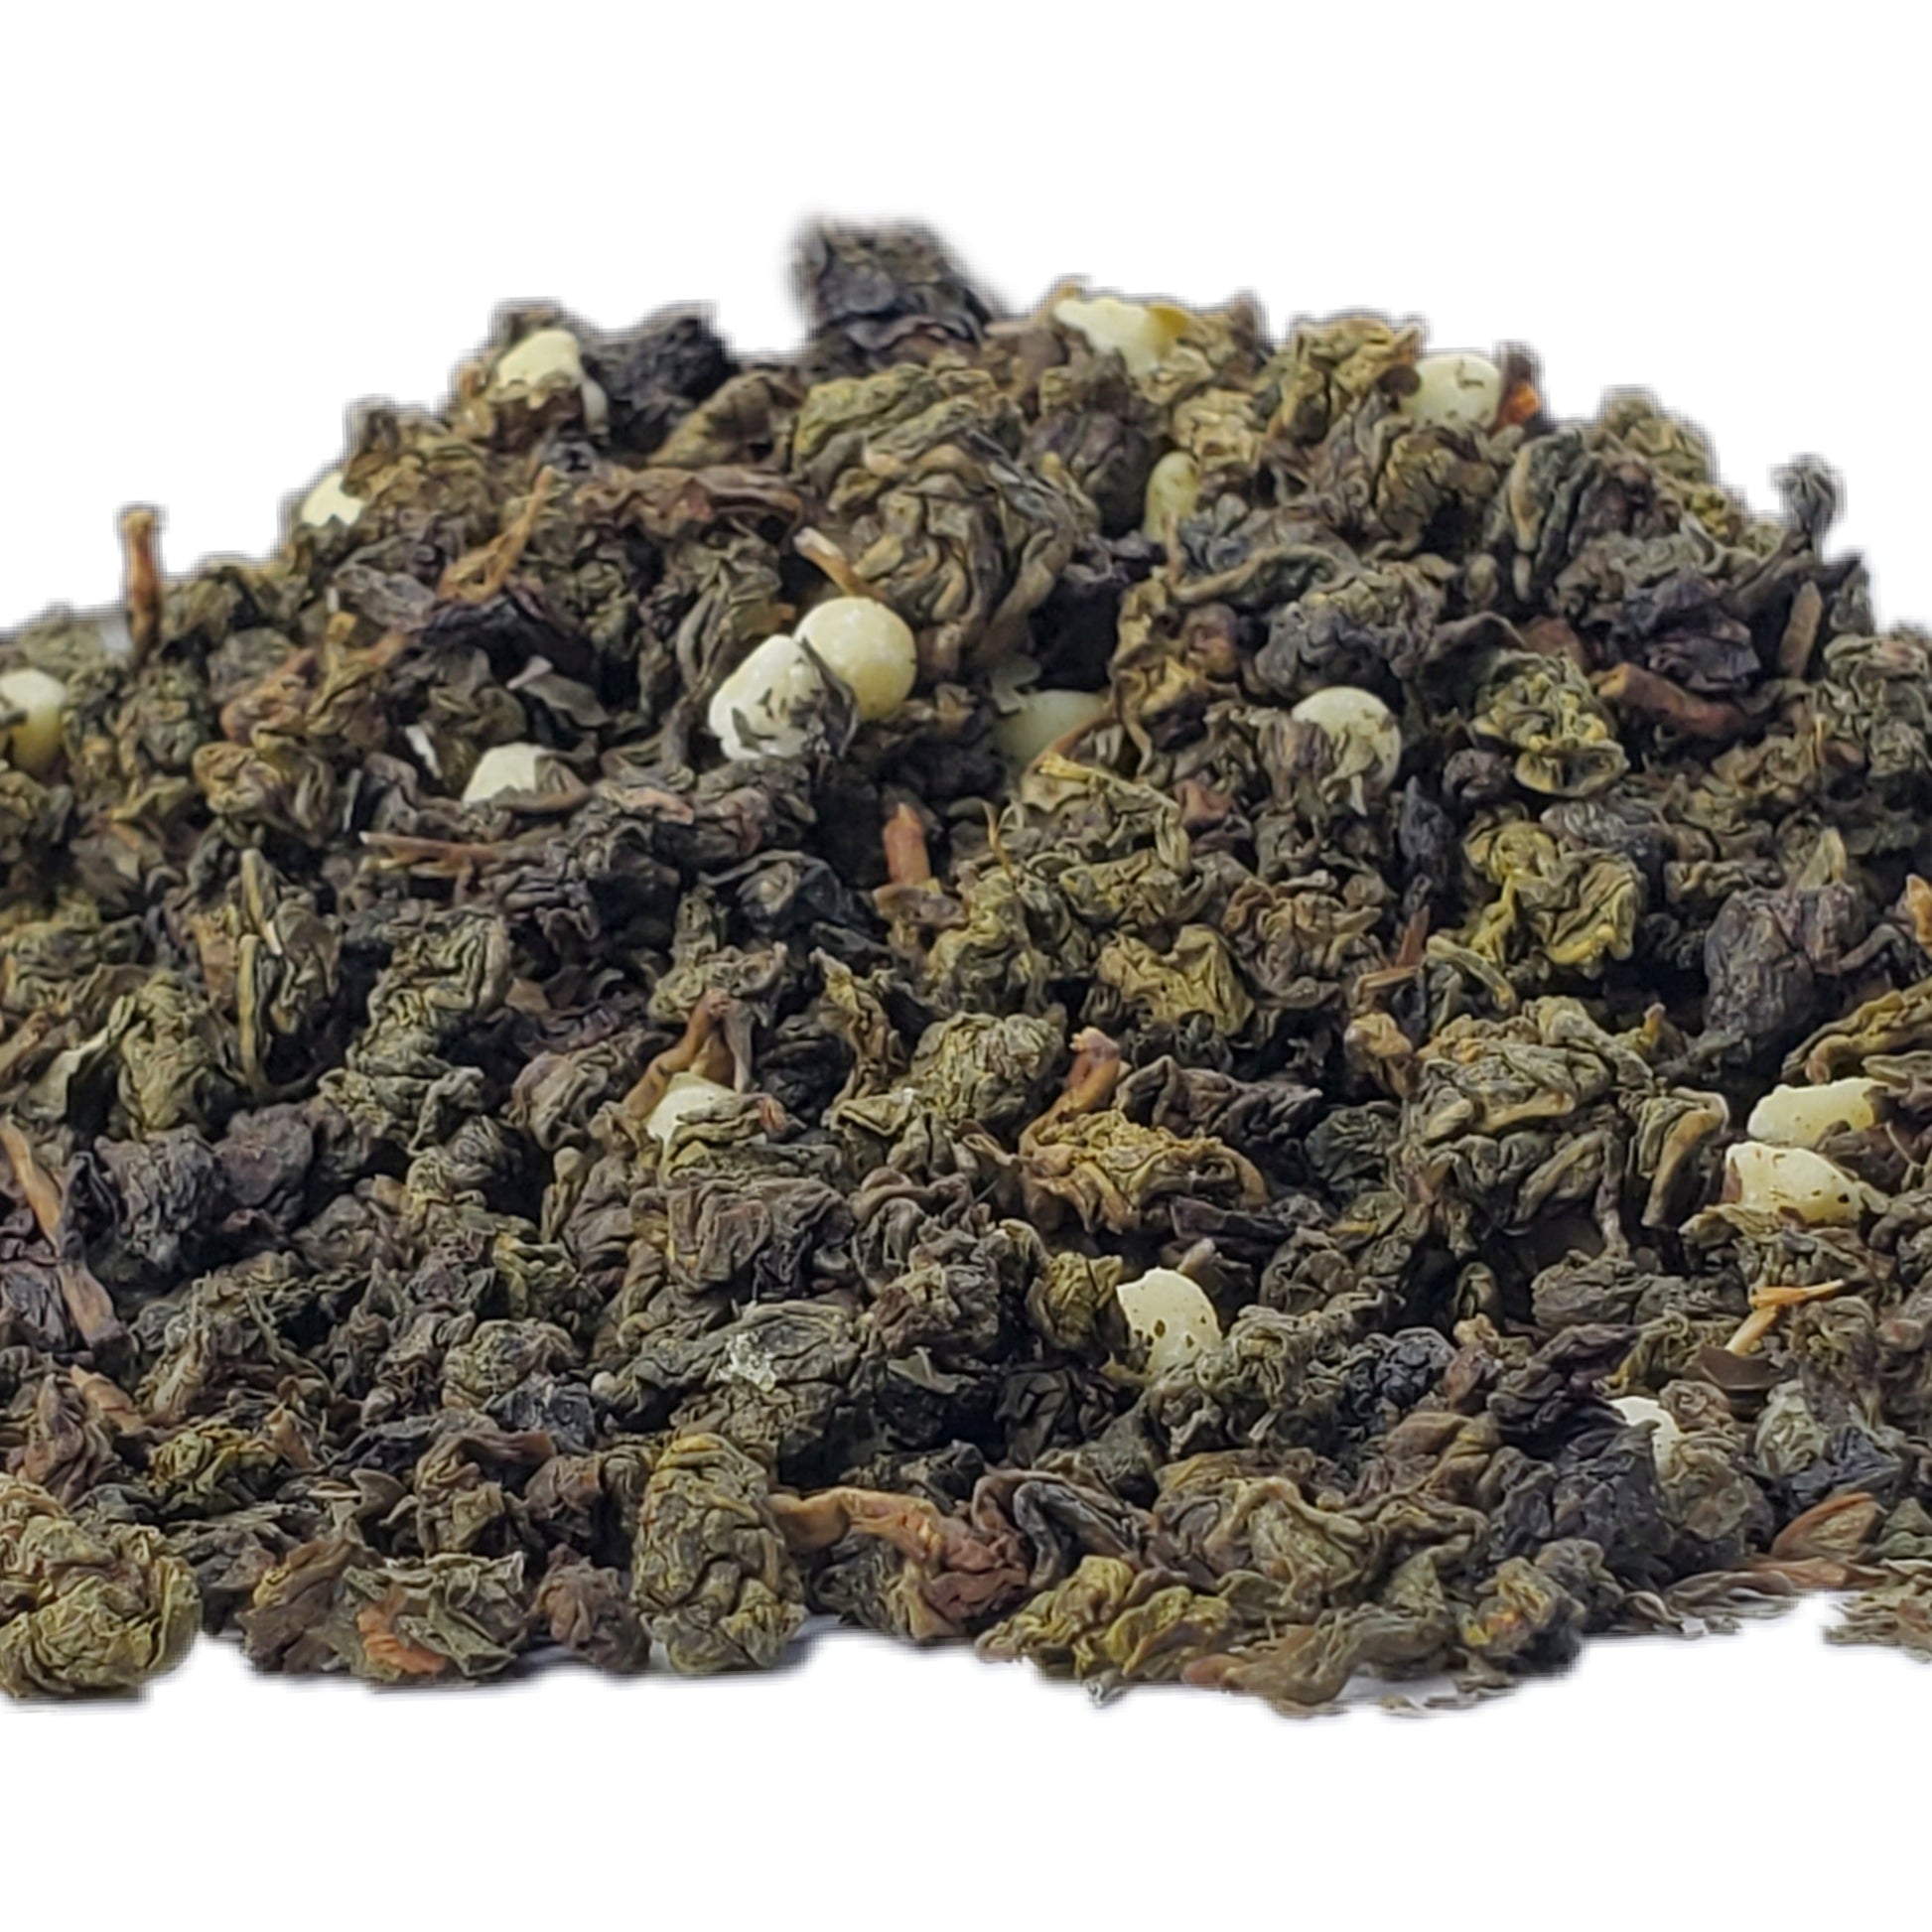 White Chocolate Mint Oolong